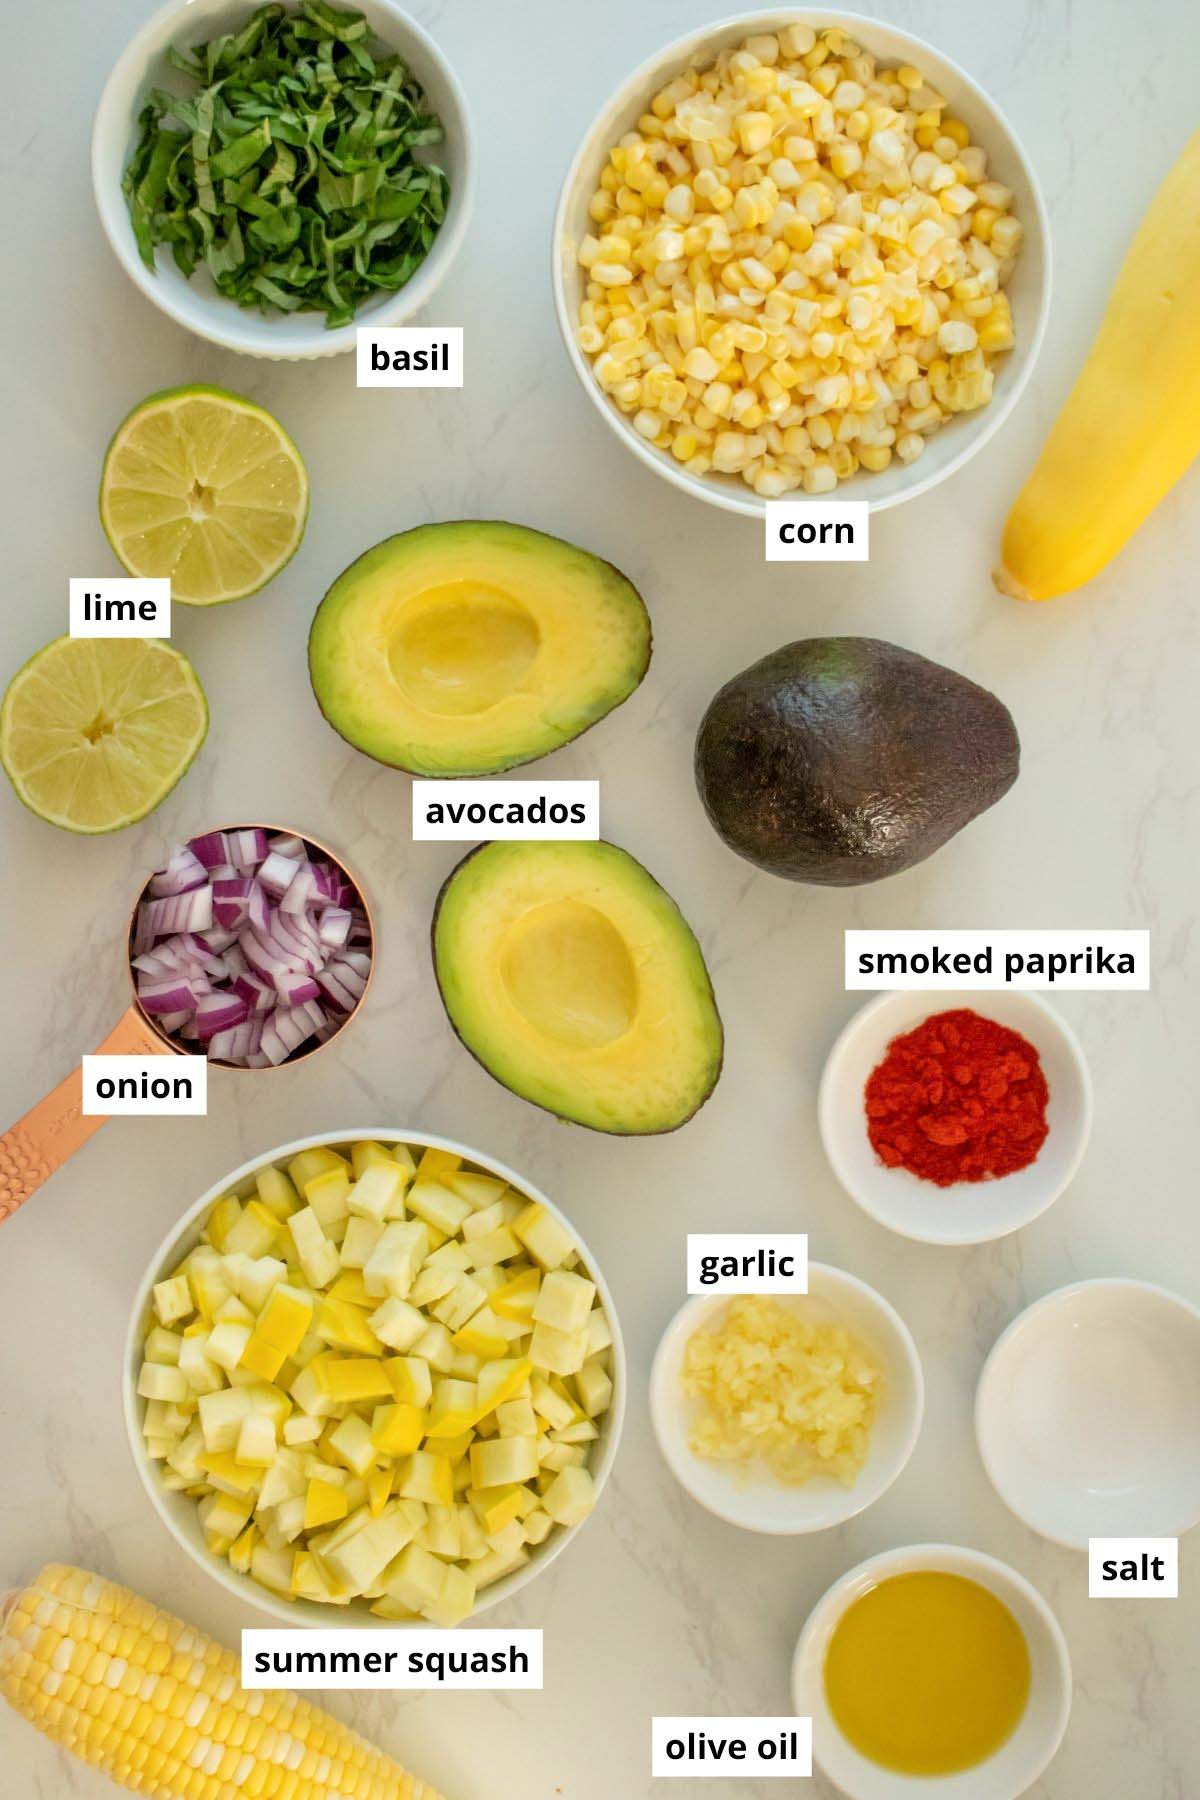 avocados, corn, squash, and seasonings in bowls on a white table